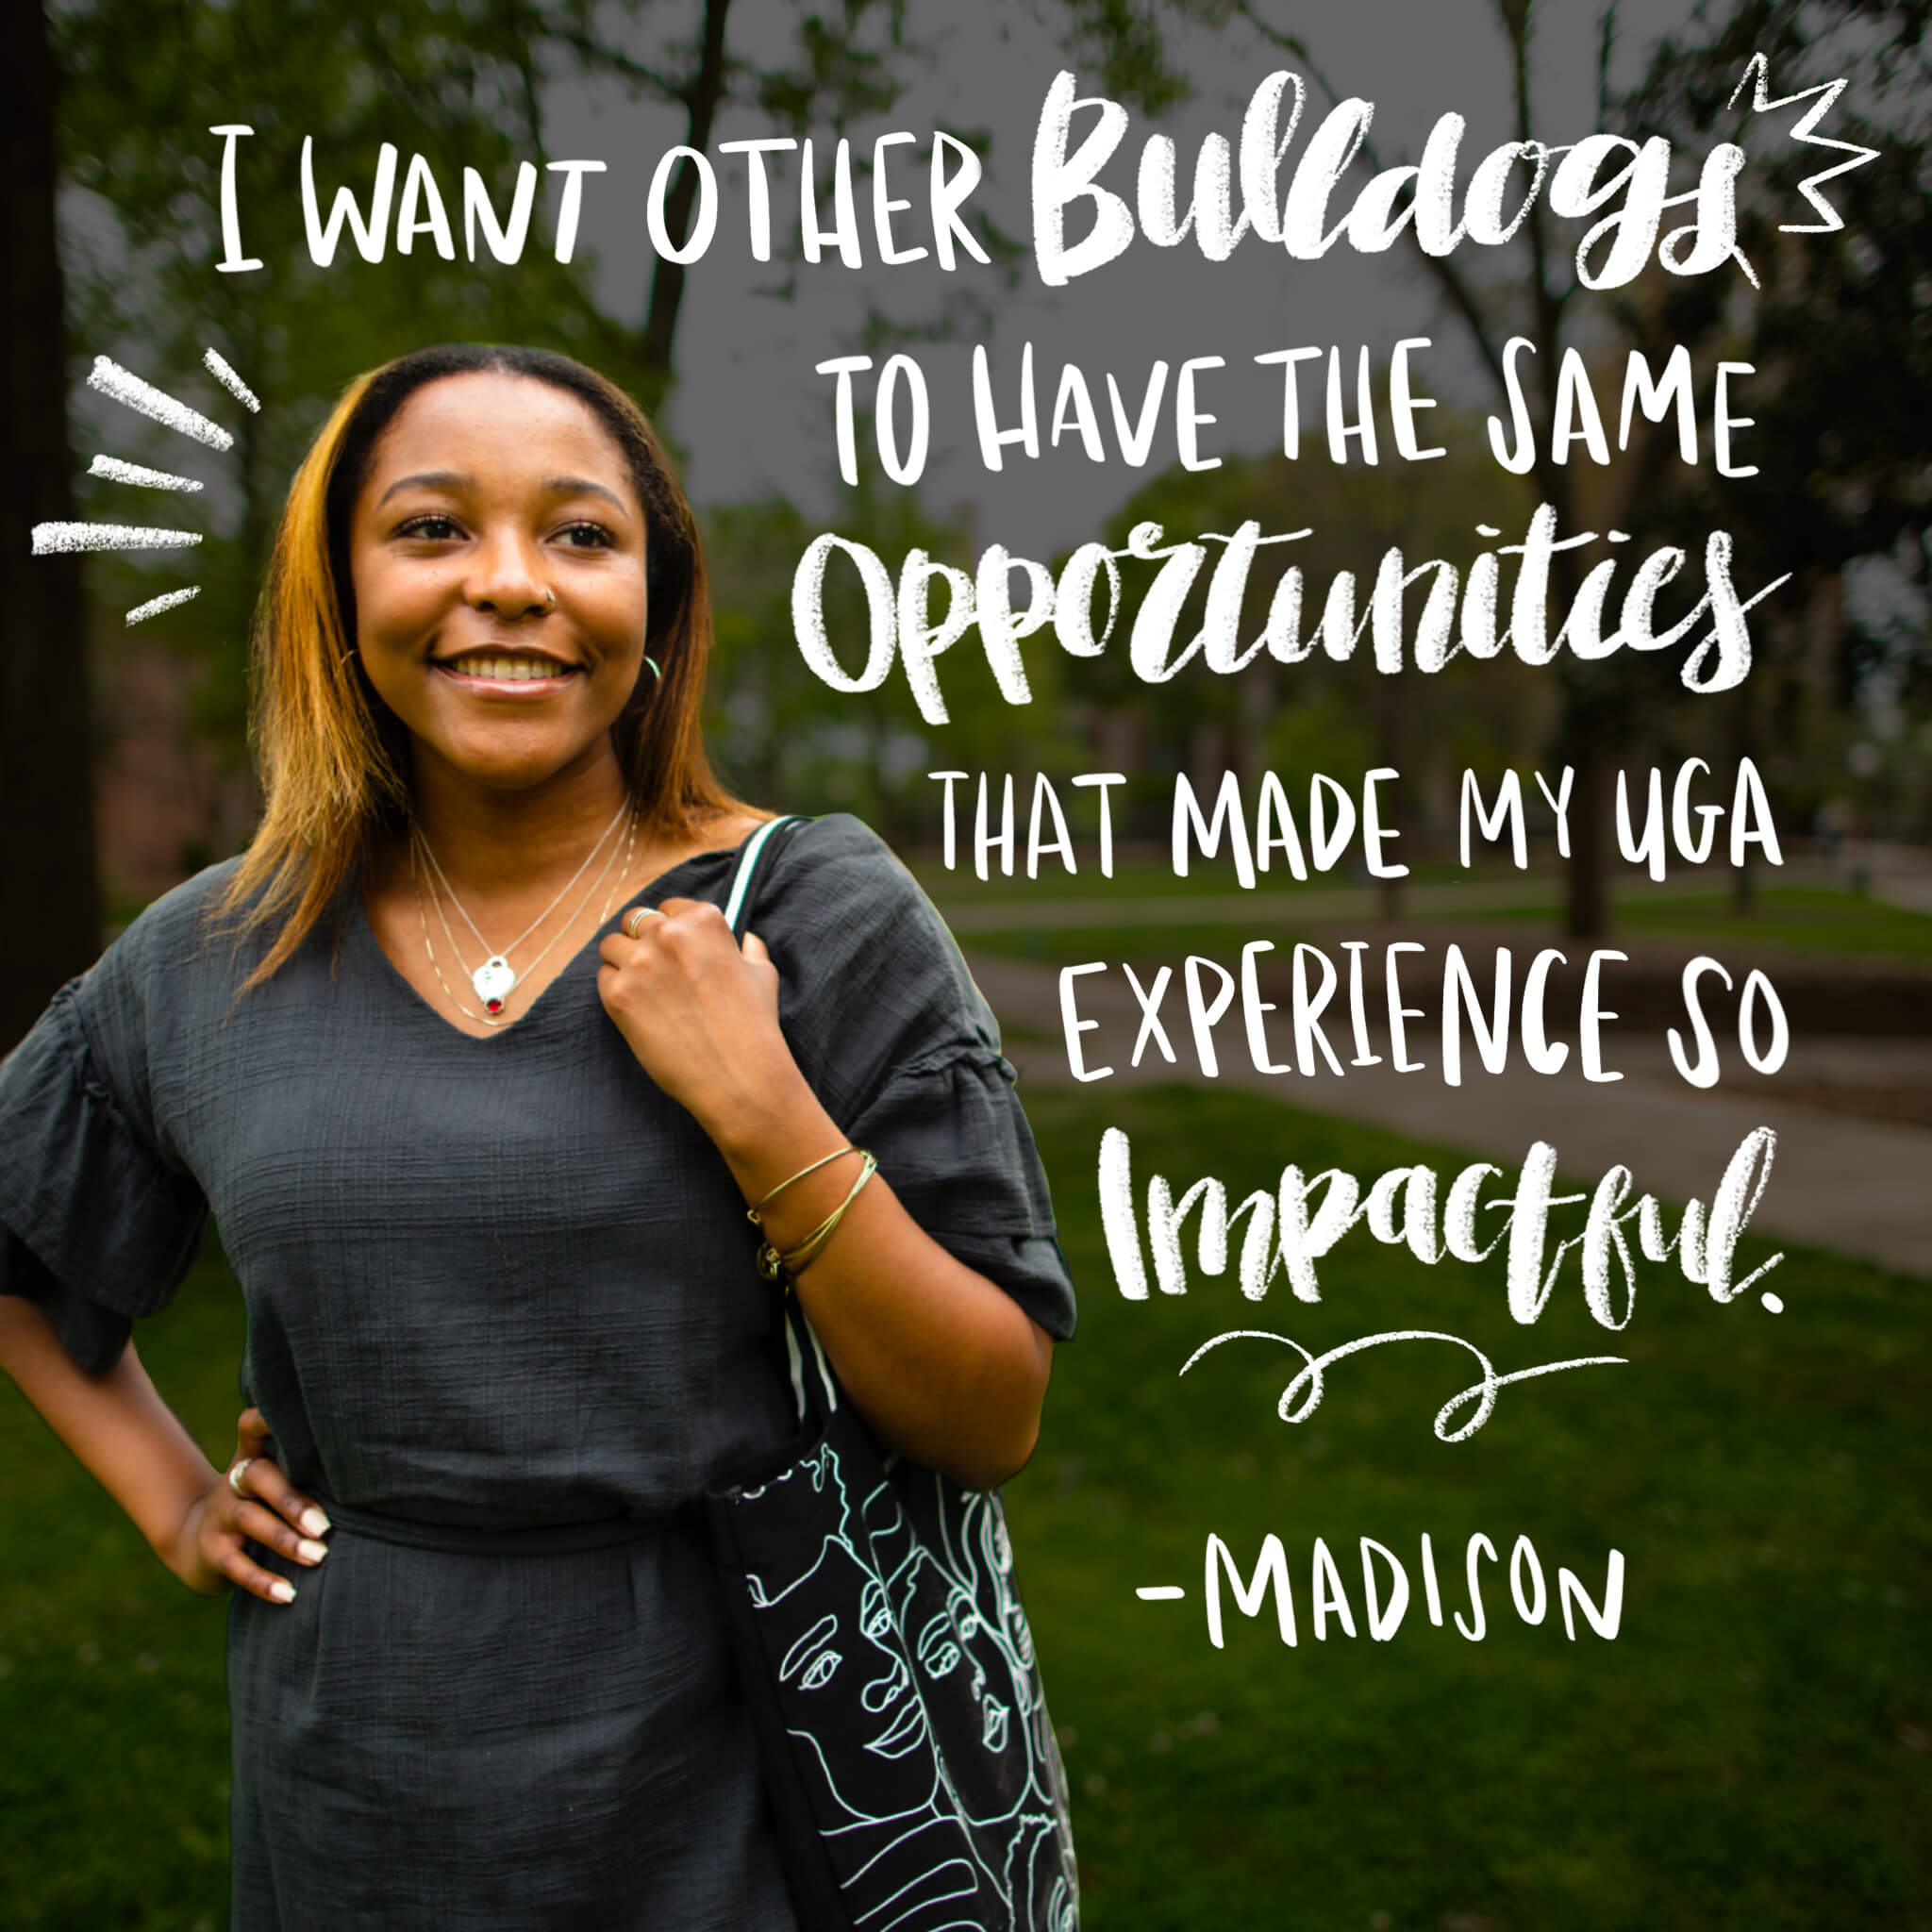 I want other Bulldogs to have the same opportunities that made my UGA experience so impactful. - Madison